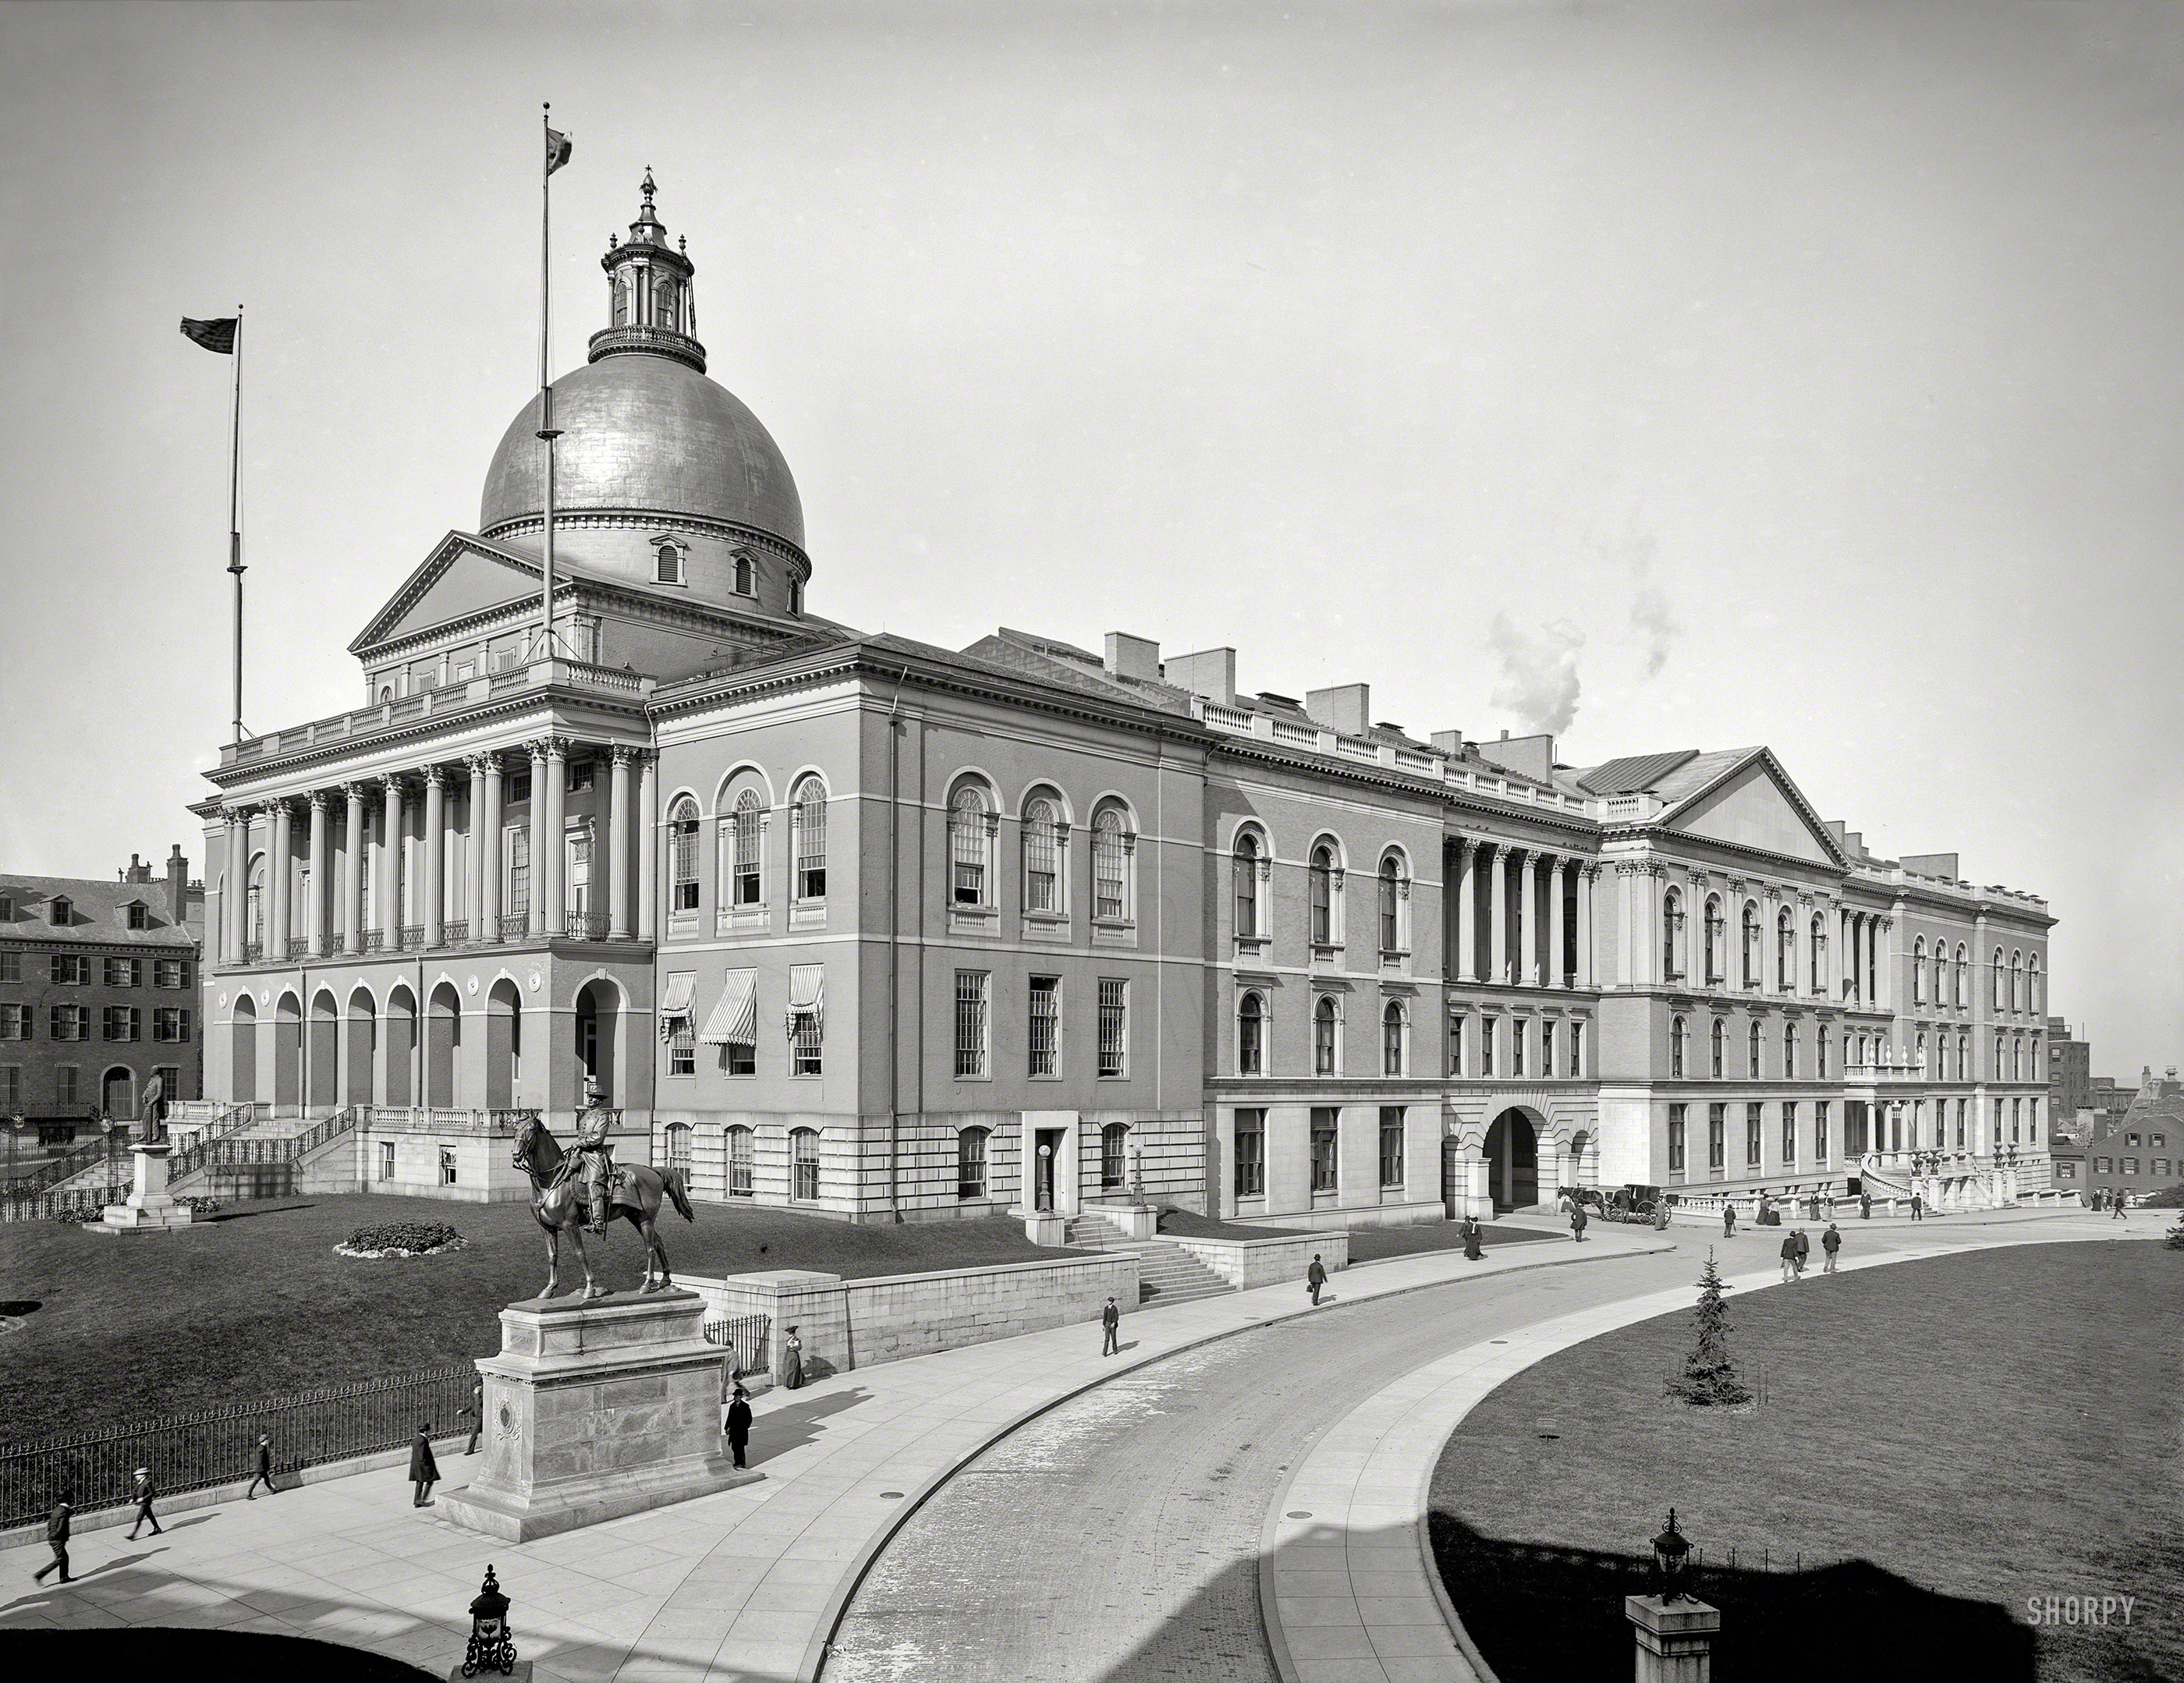 Circa 1904. "State House, Boston, Mass." With Gen. Hooker on sentry duty 24/7. 8x10 inch dry plate glass negative, Detroit Photographic Co. View full size.